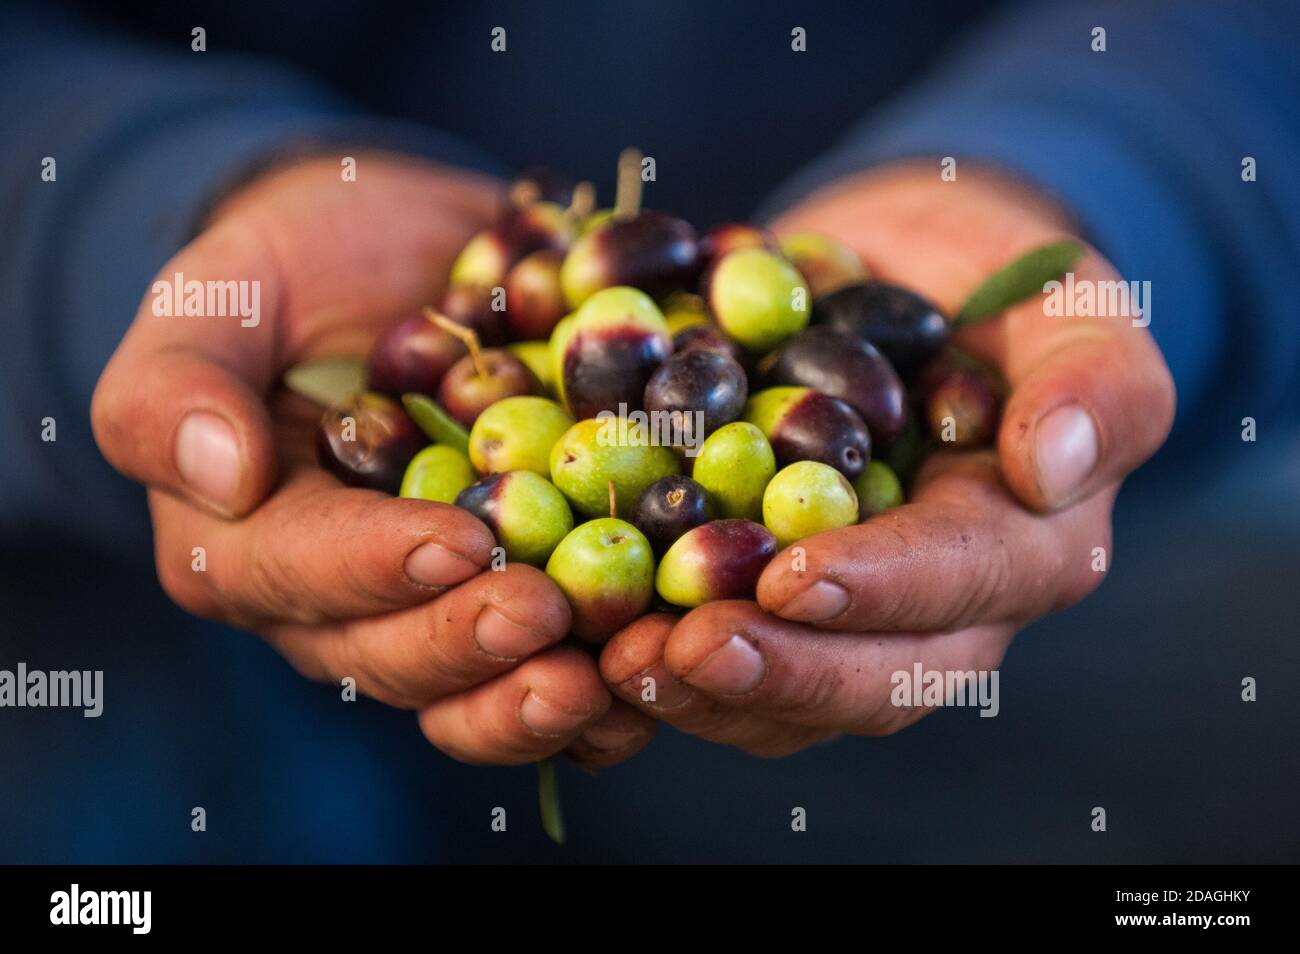 Harvested fresh organic olives in the hands of farmer view frontal blue background Stock Photo